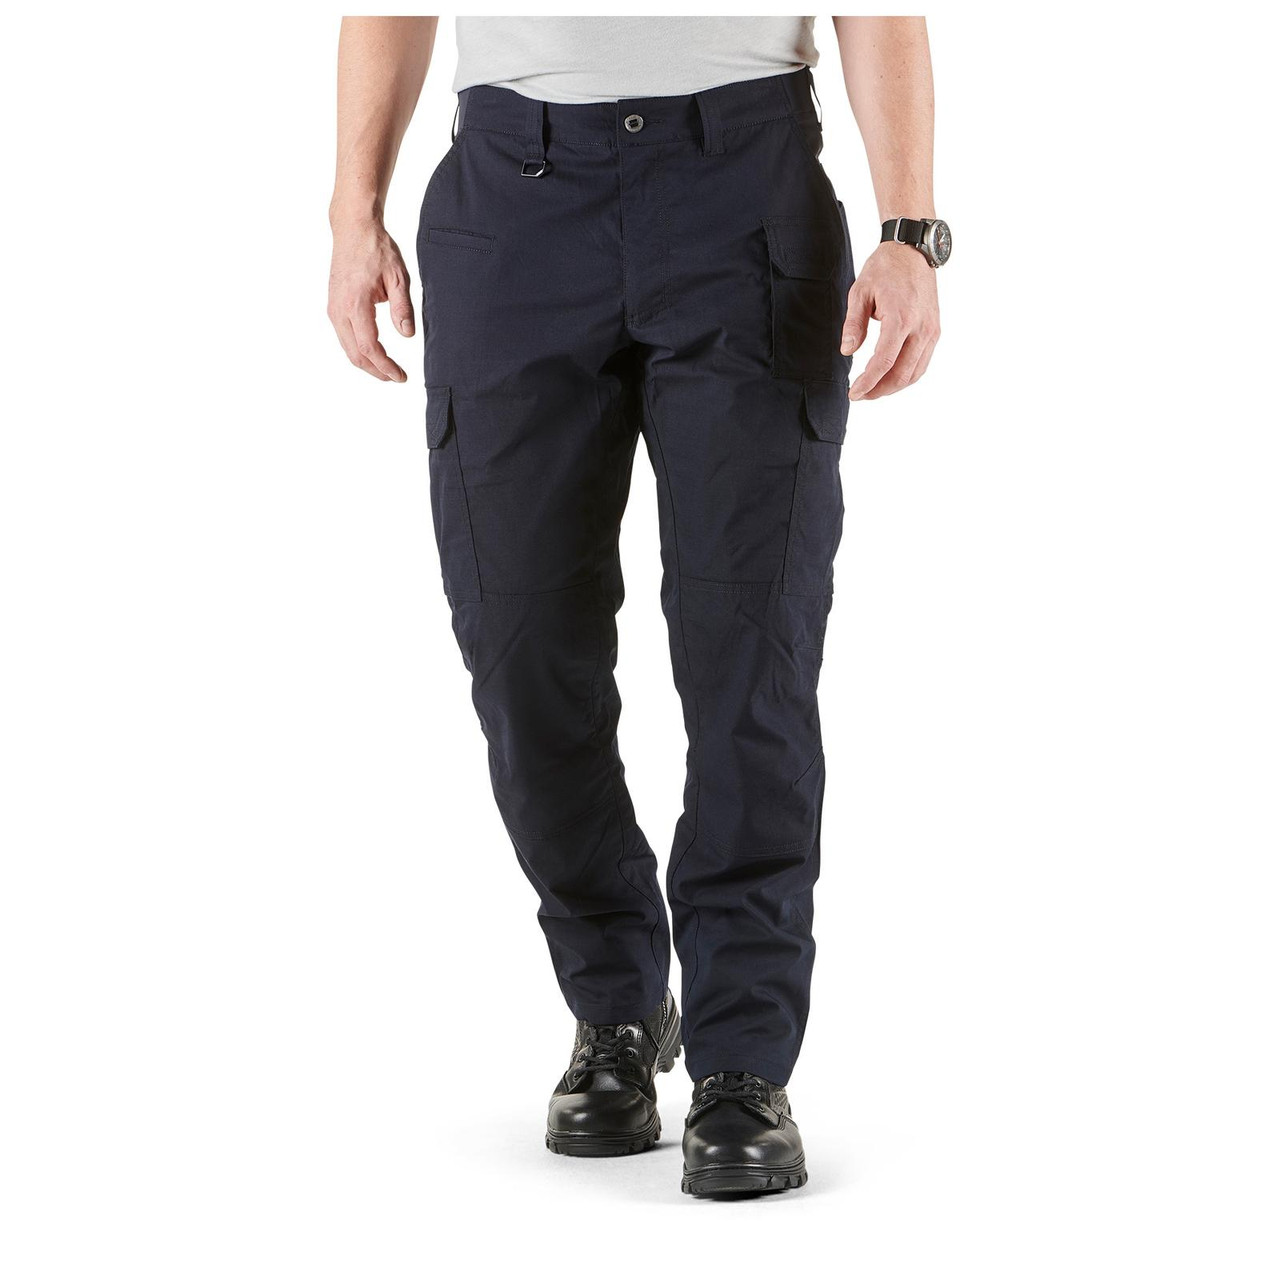 5.11 Tactical Men's ABR Pro Pants - Fin Feather Fur Outfitters